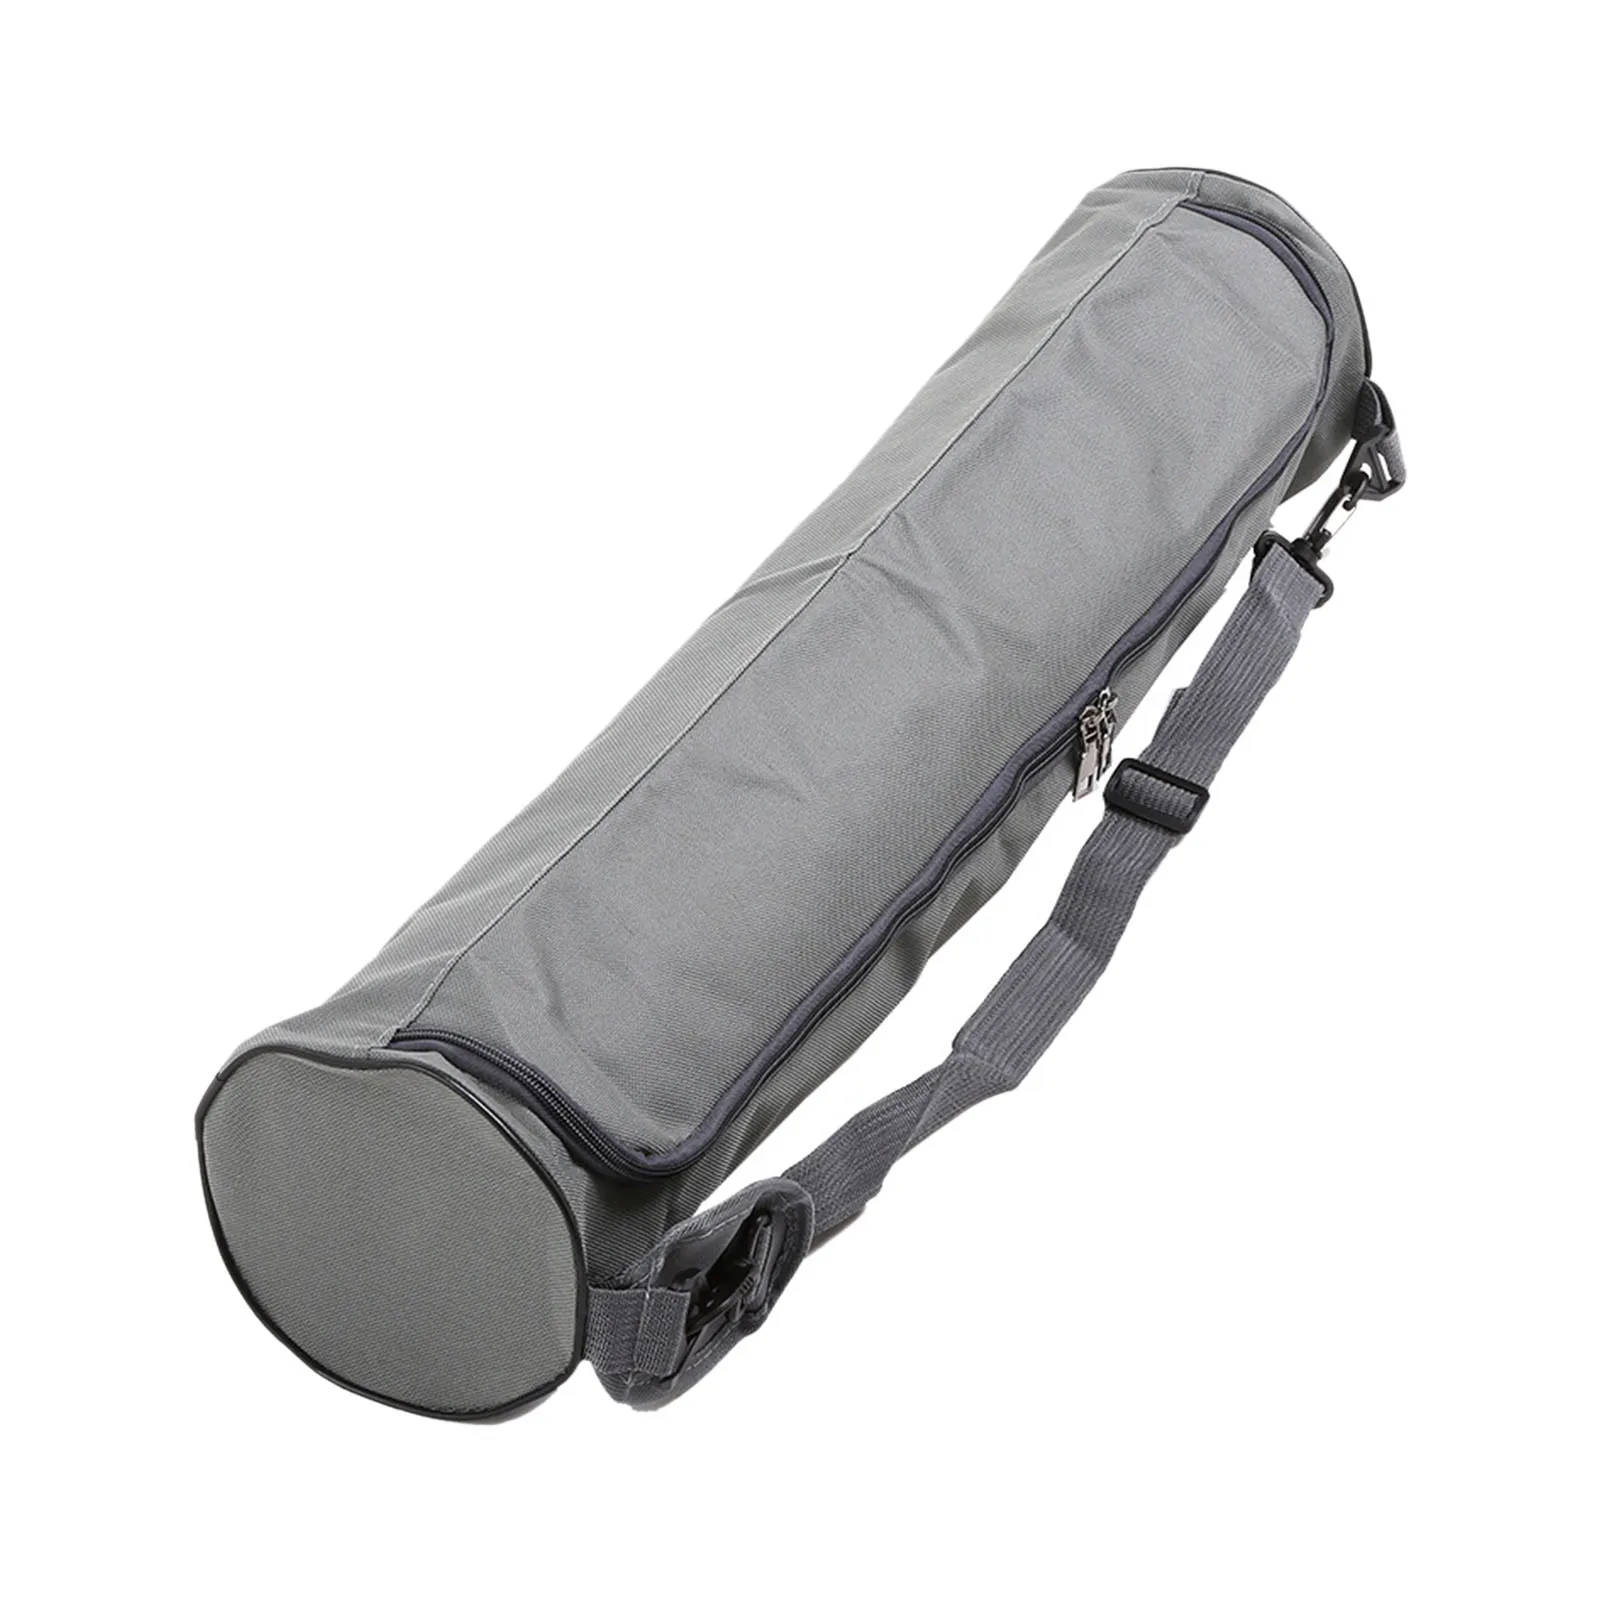 Yoga Mat Bag with Shoulder Strap for Exercise Waterproof Oxford Mat Bag and Strap Sling for Carrying Your Workout Gear